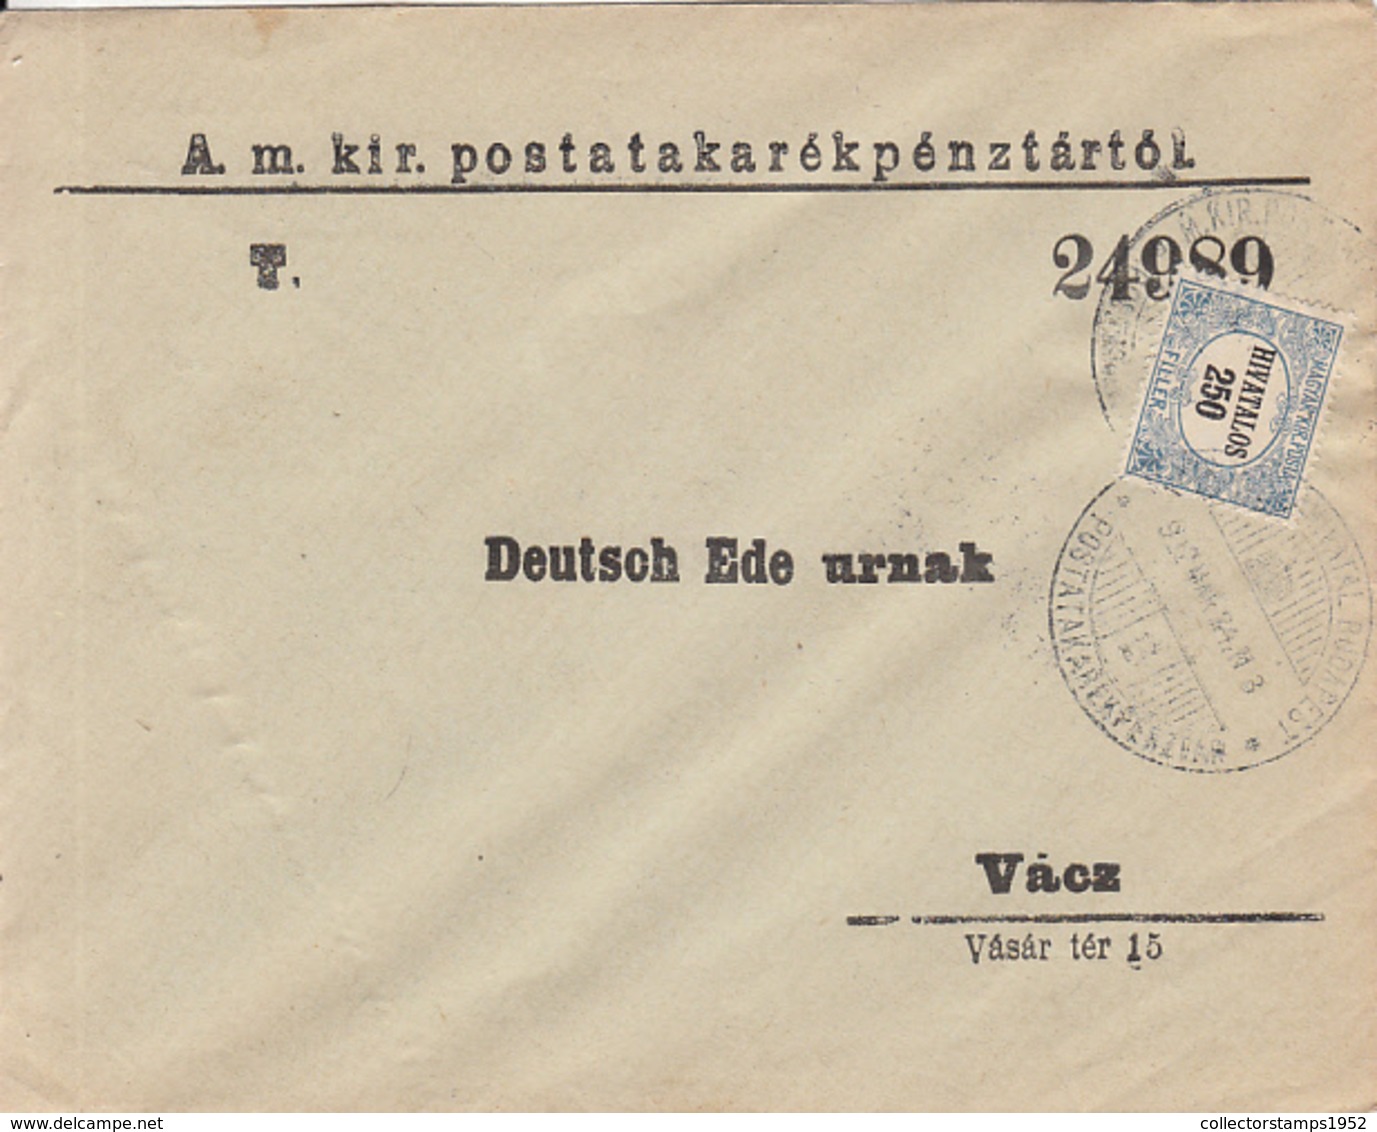 7345FM- 250 FILLER OFFICIAL STAMP ON POST SAVINGS BANK HEADER COVER, 1922, HUNGARY - Oficiales